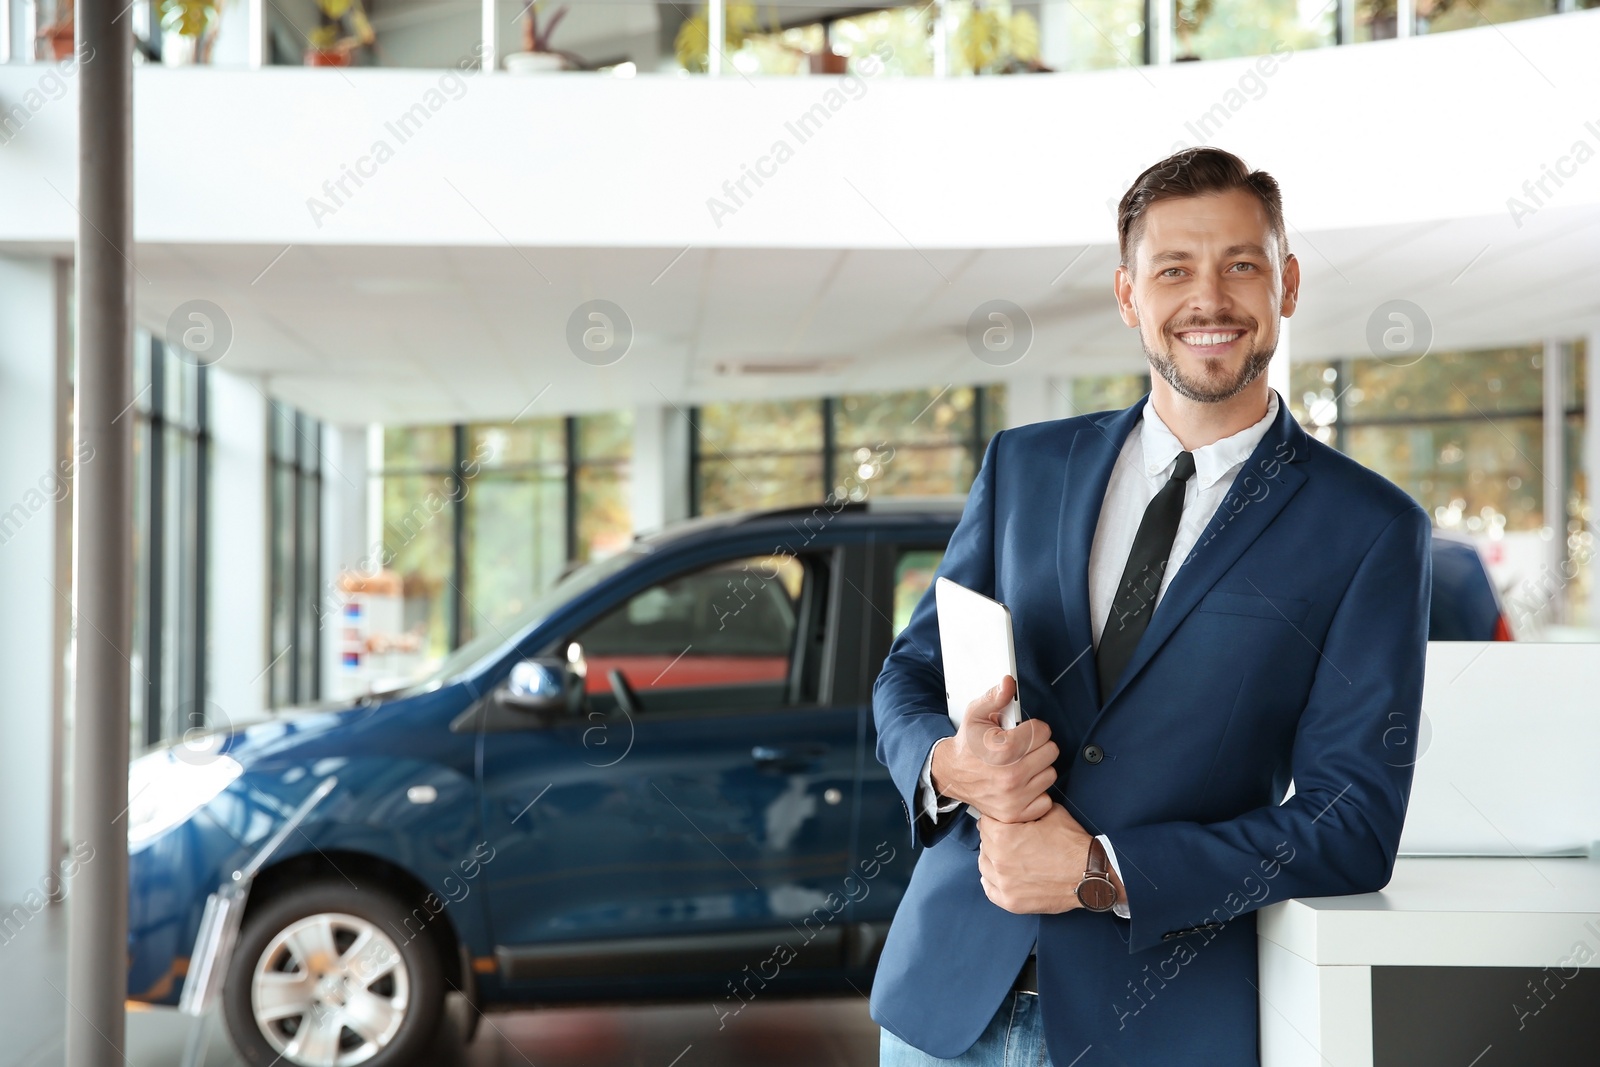 Photo of Salesman with tablet in modern car dealership